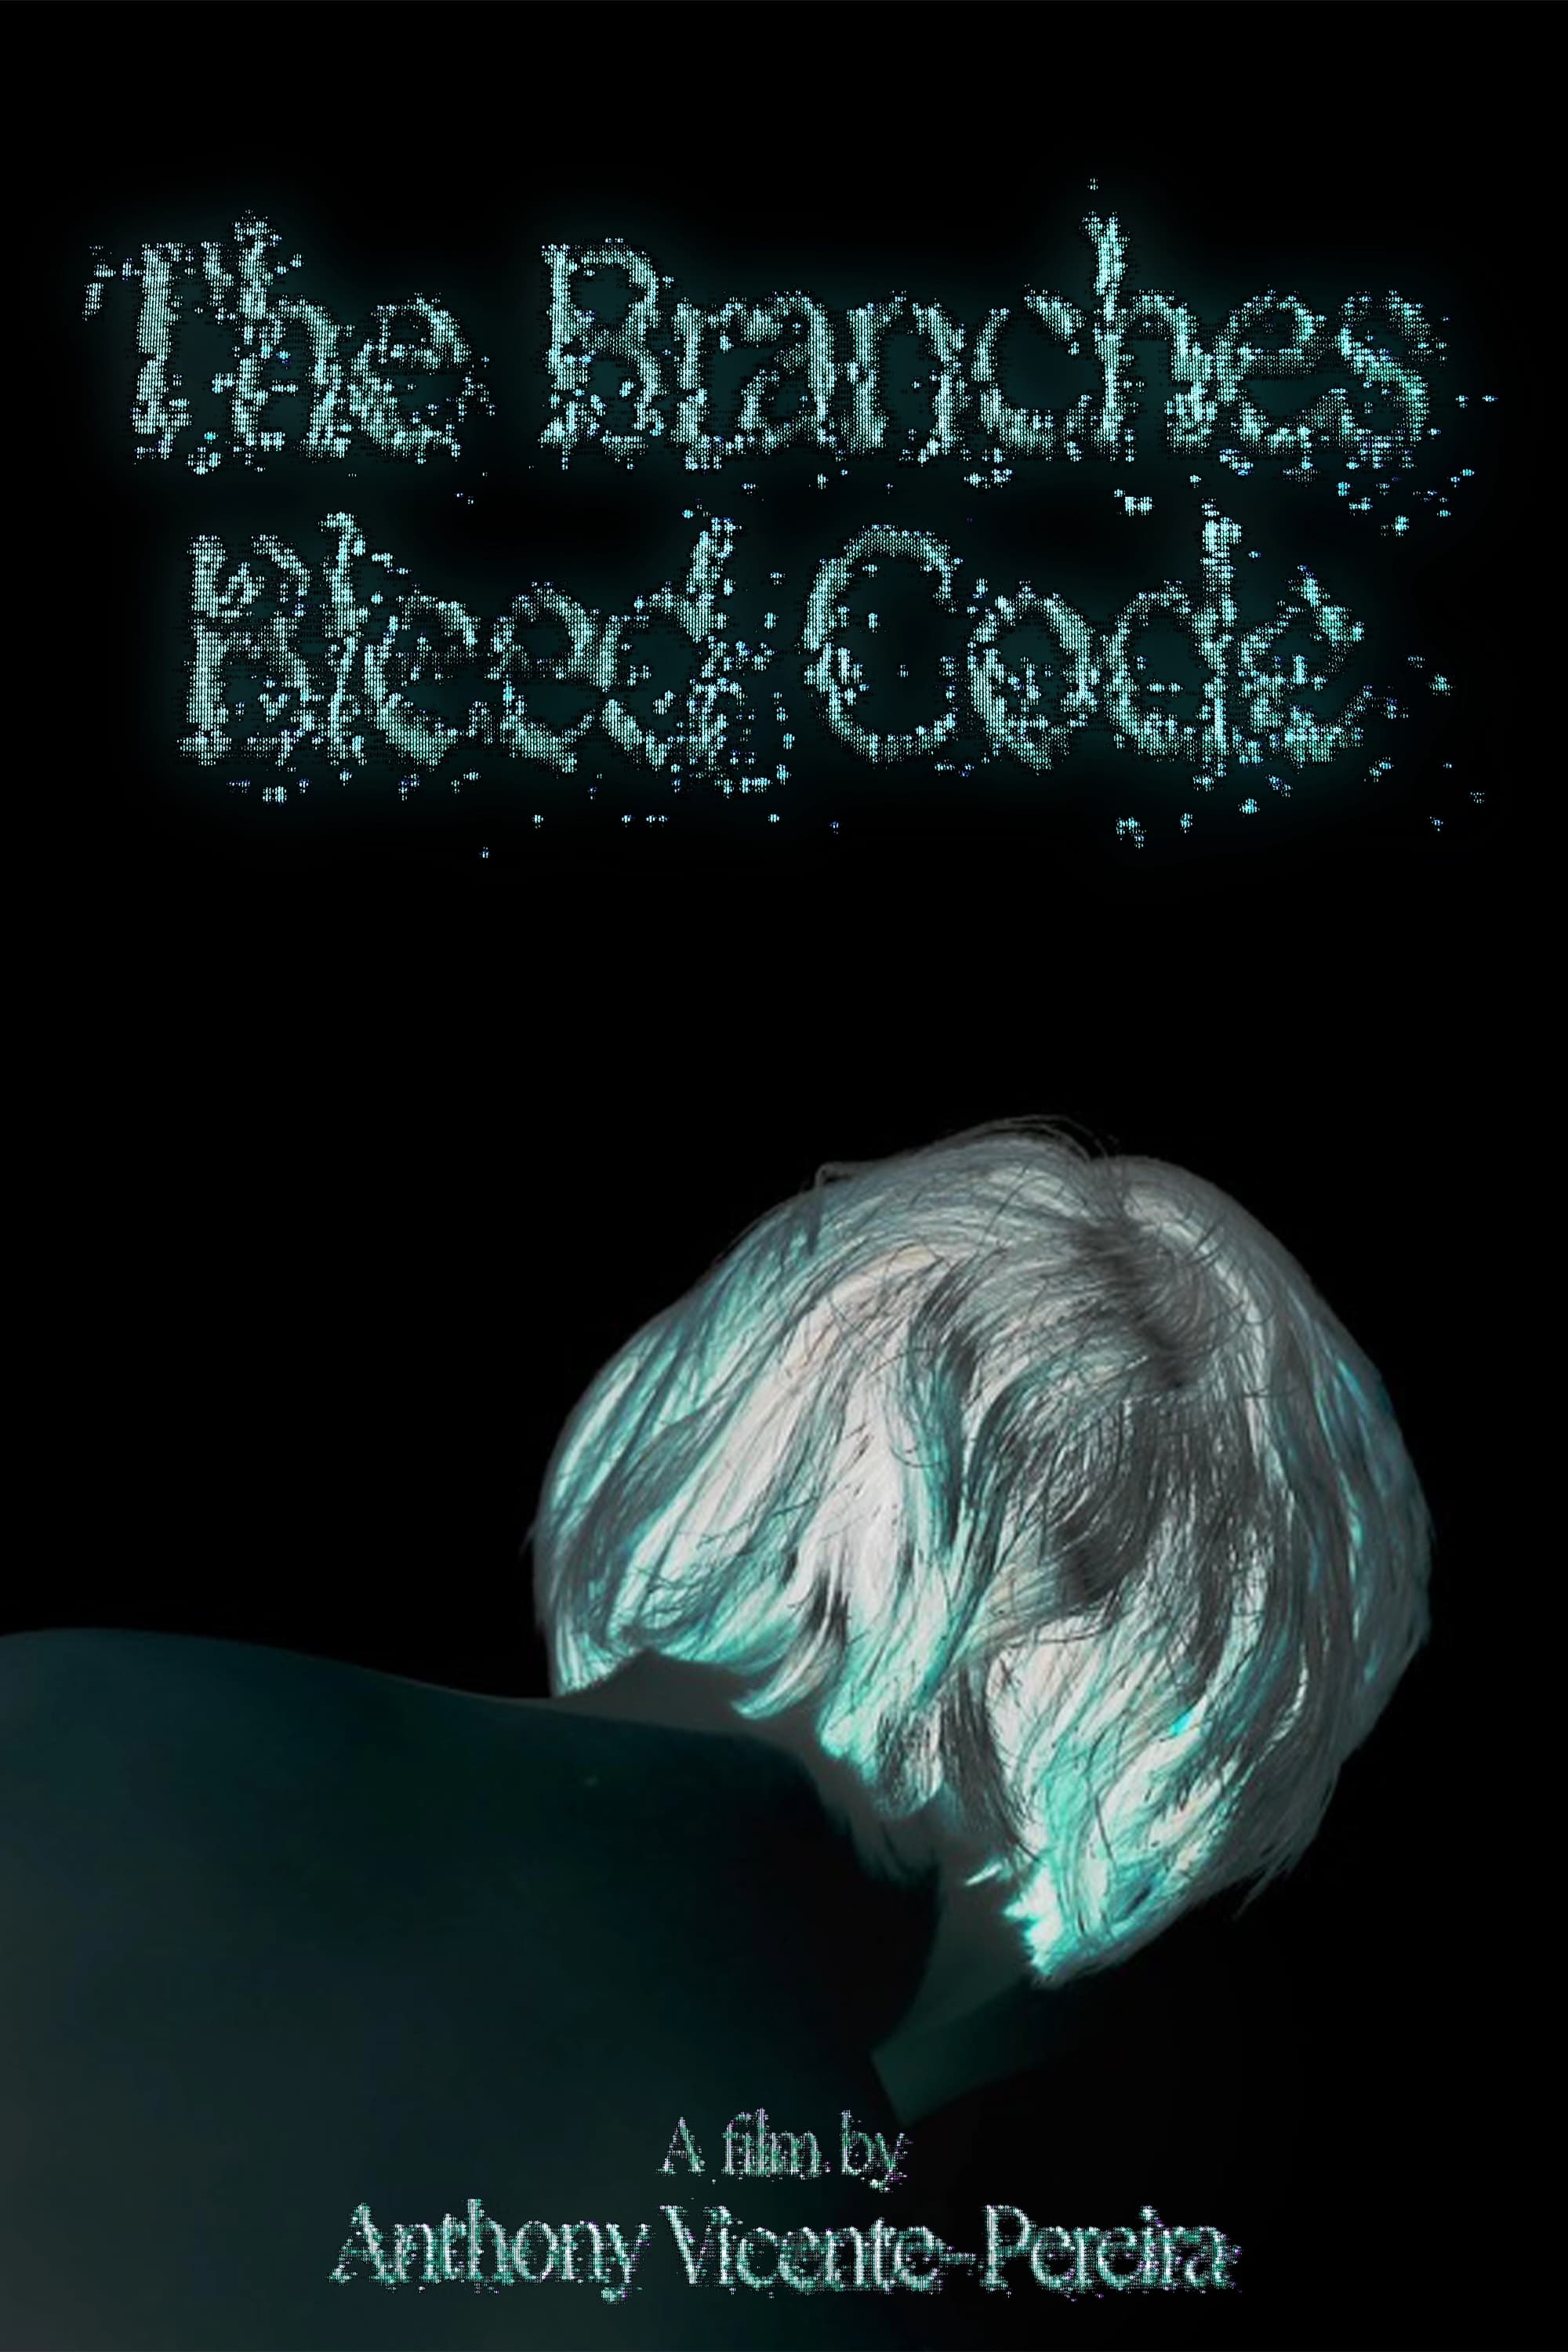 The Branches Bleed Code